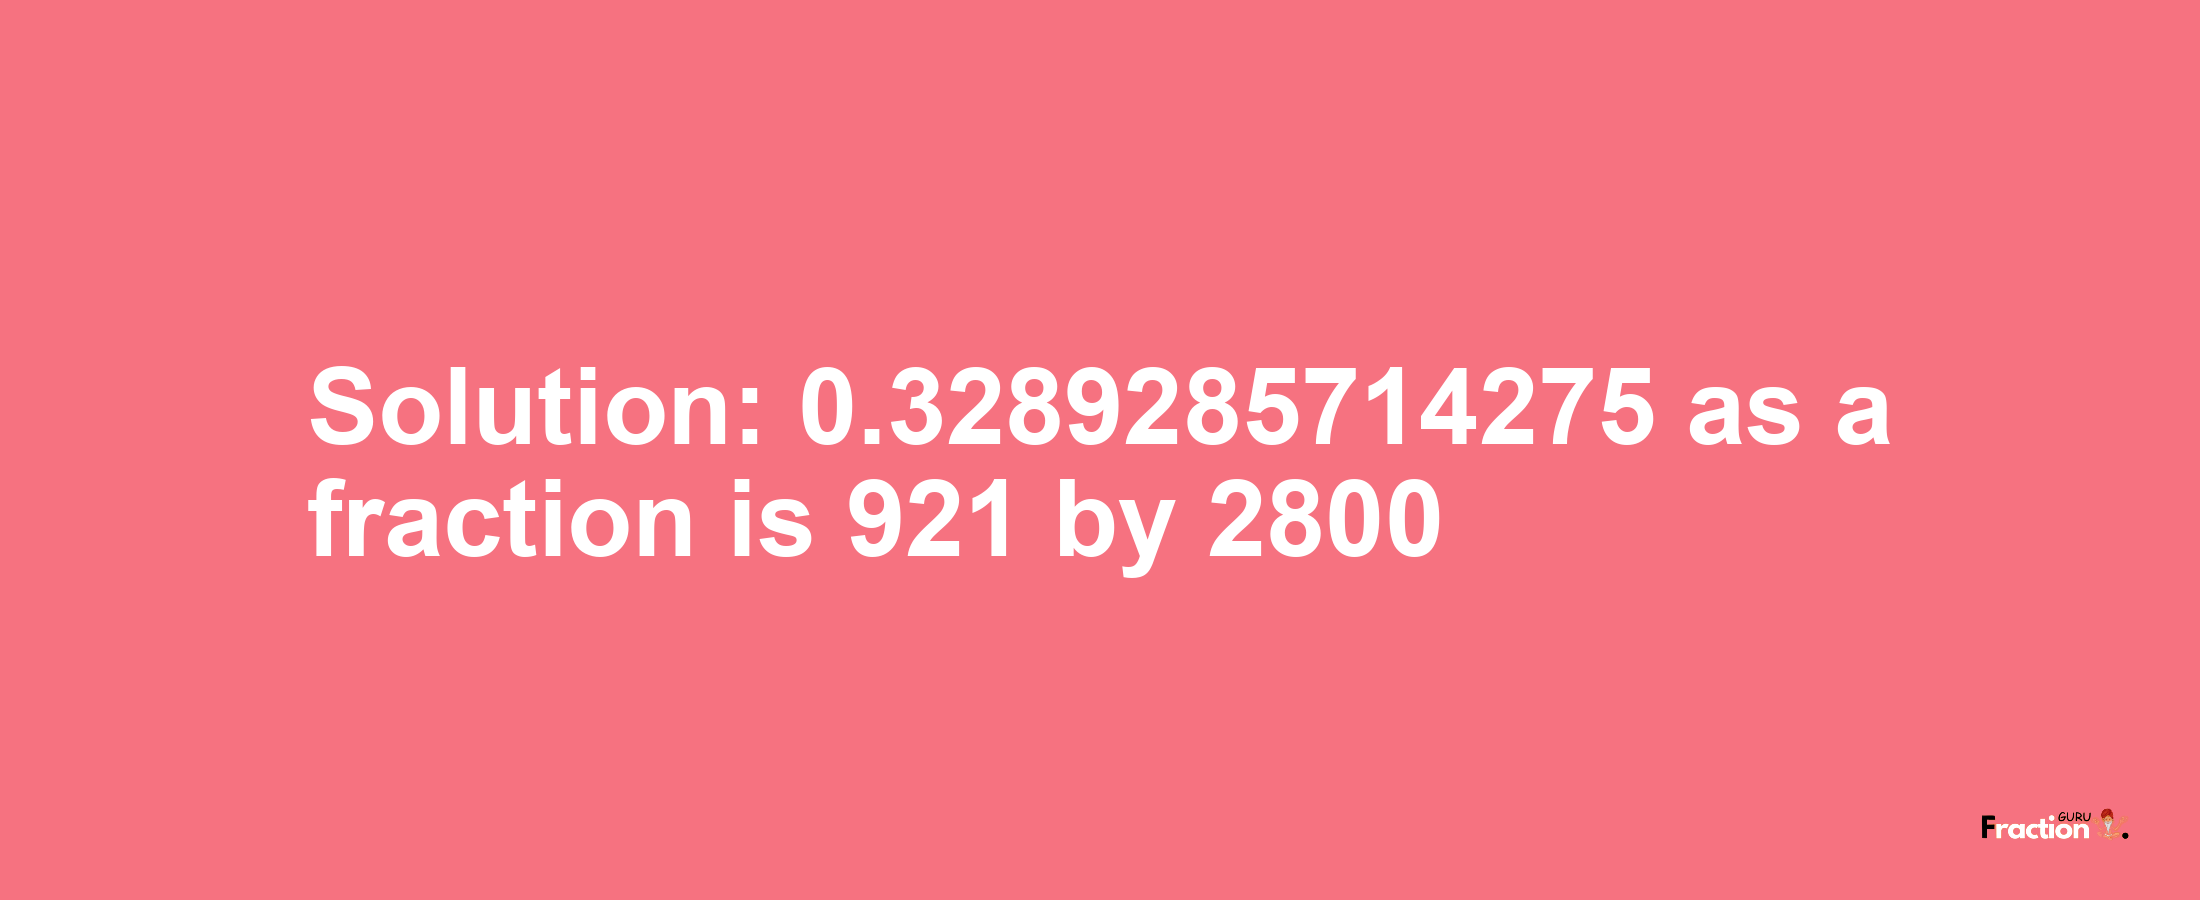 Solution:0.3289285714275 as a fraction is 921/2800